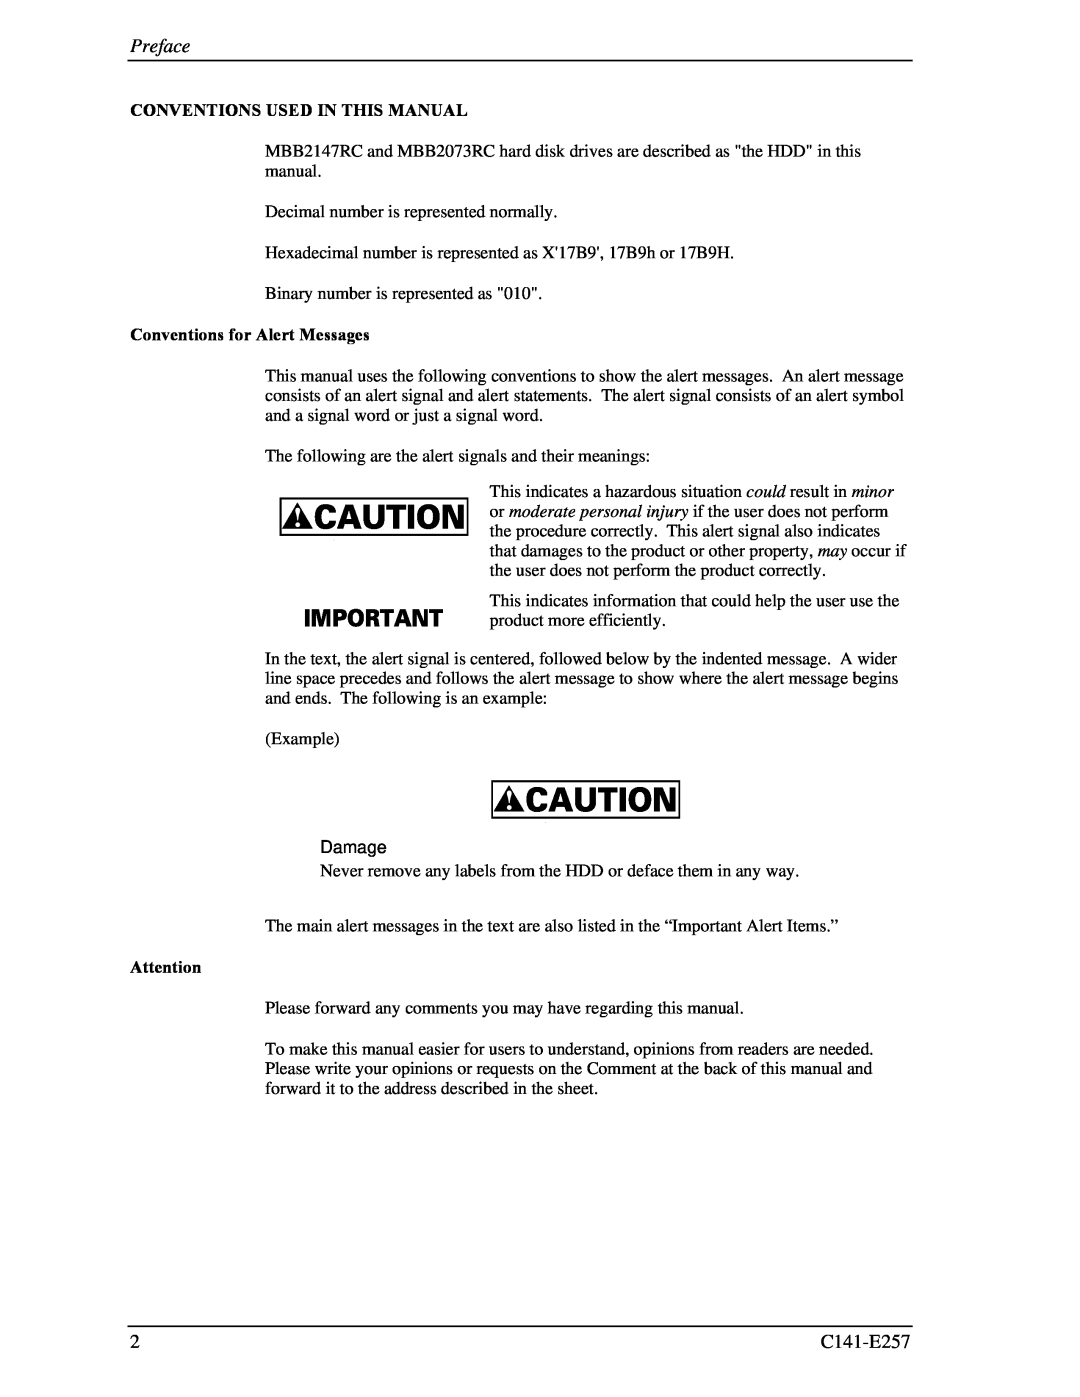 Fujitsu MBB2147RC, MBB2073RC manual Preface, Conventions Used In This Manual, Conventions for Alert Messages 